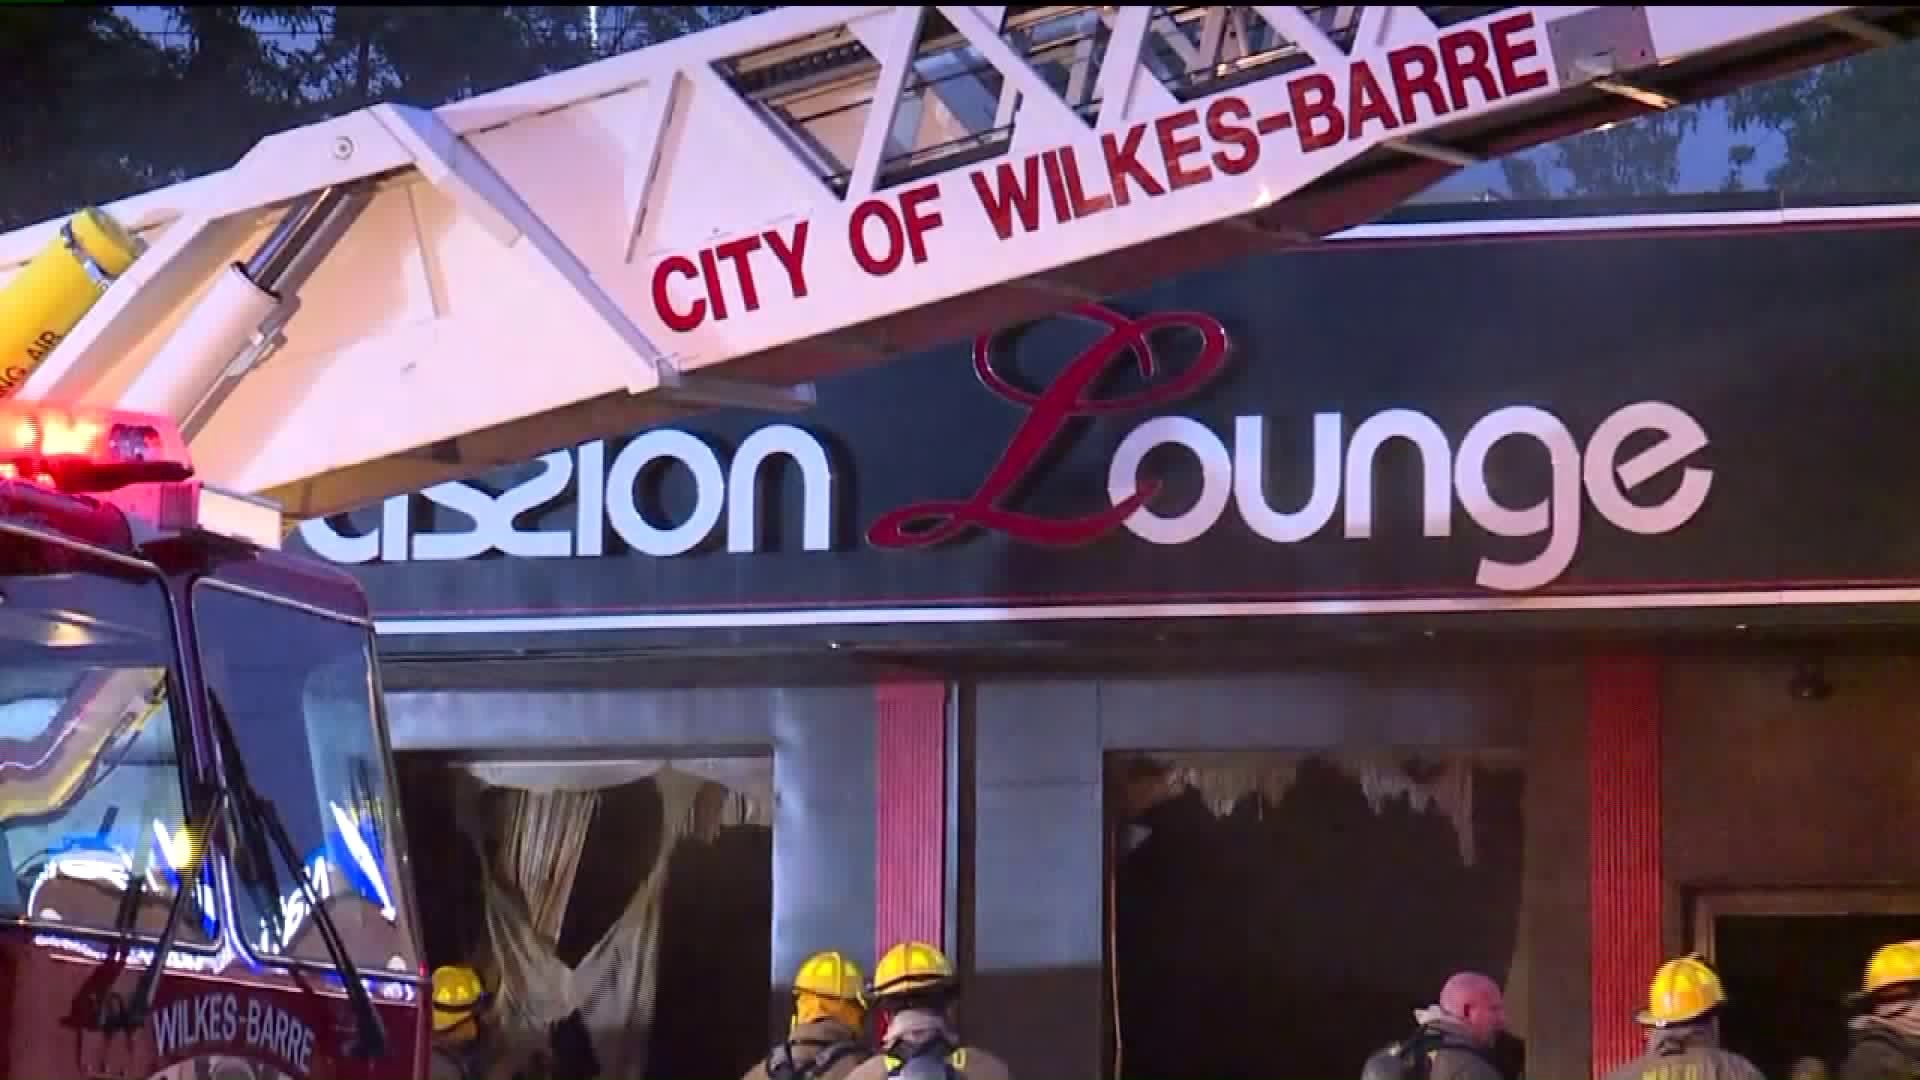 Electrical Issue Blamed for Nightclub Fire in Wilkes-Barre